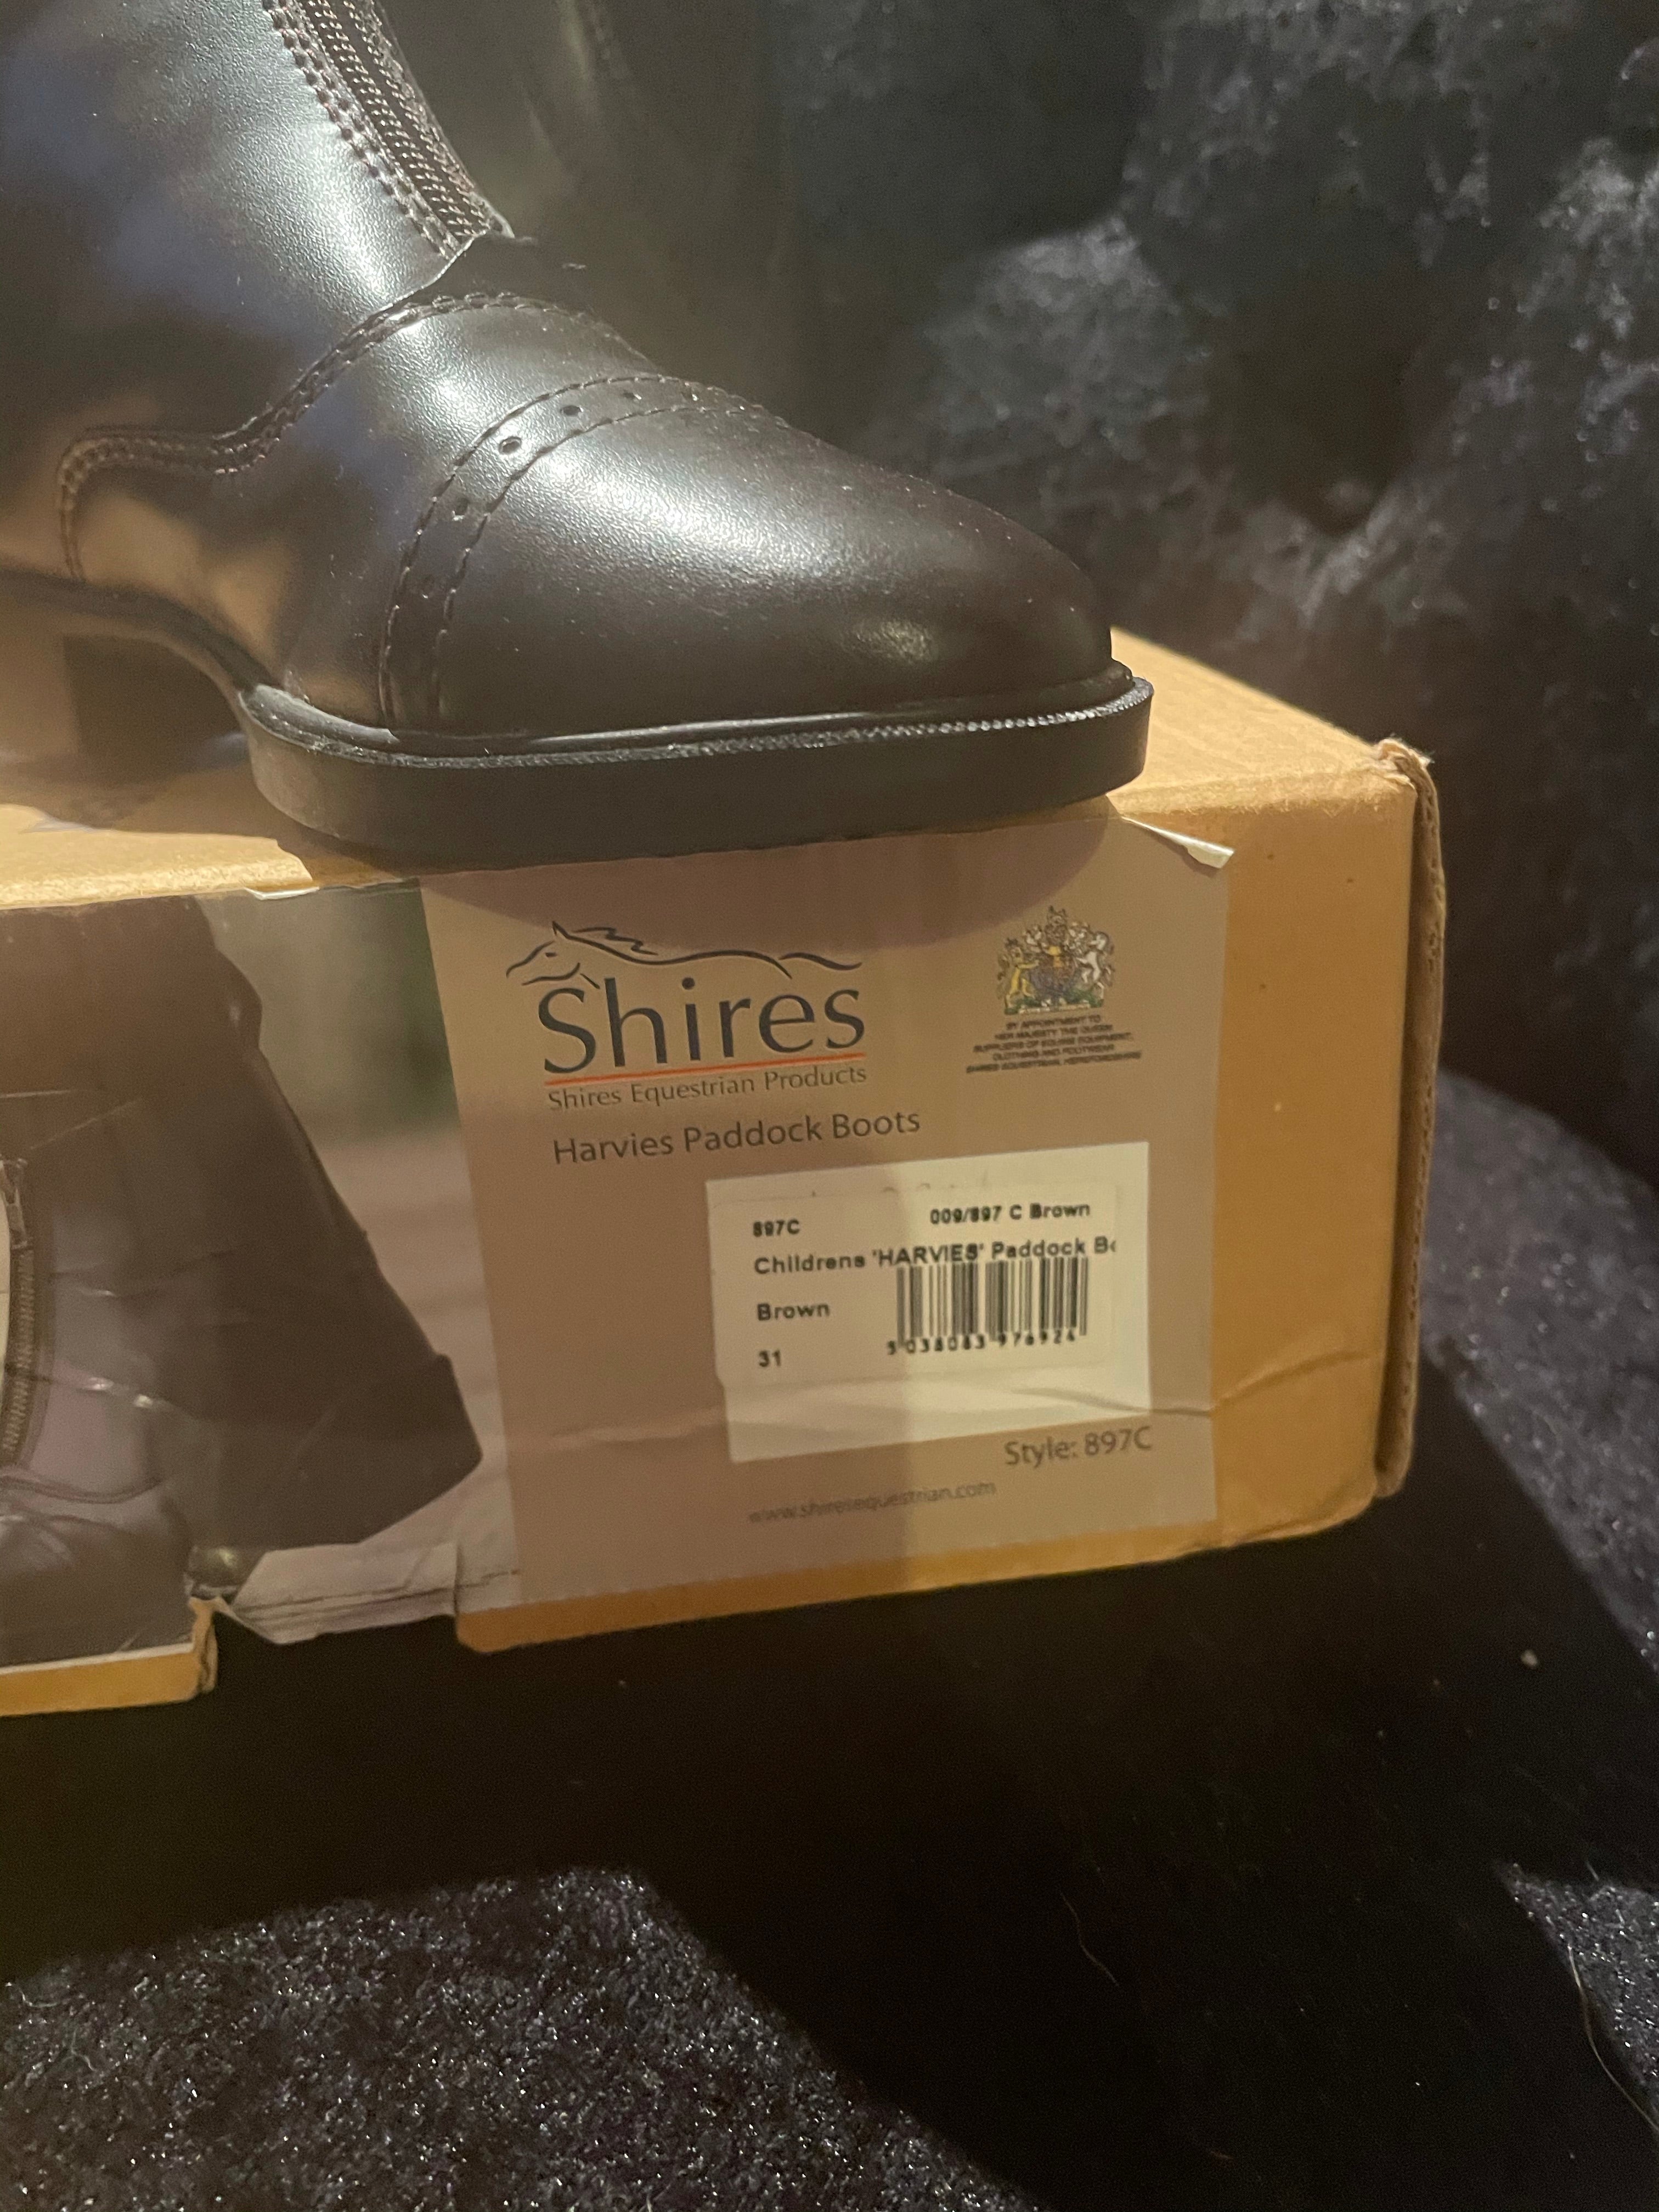 Shires Harvies Childs Paddock Boots - Size 31 / 12 - Brown